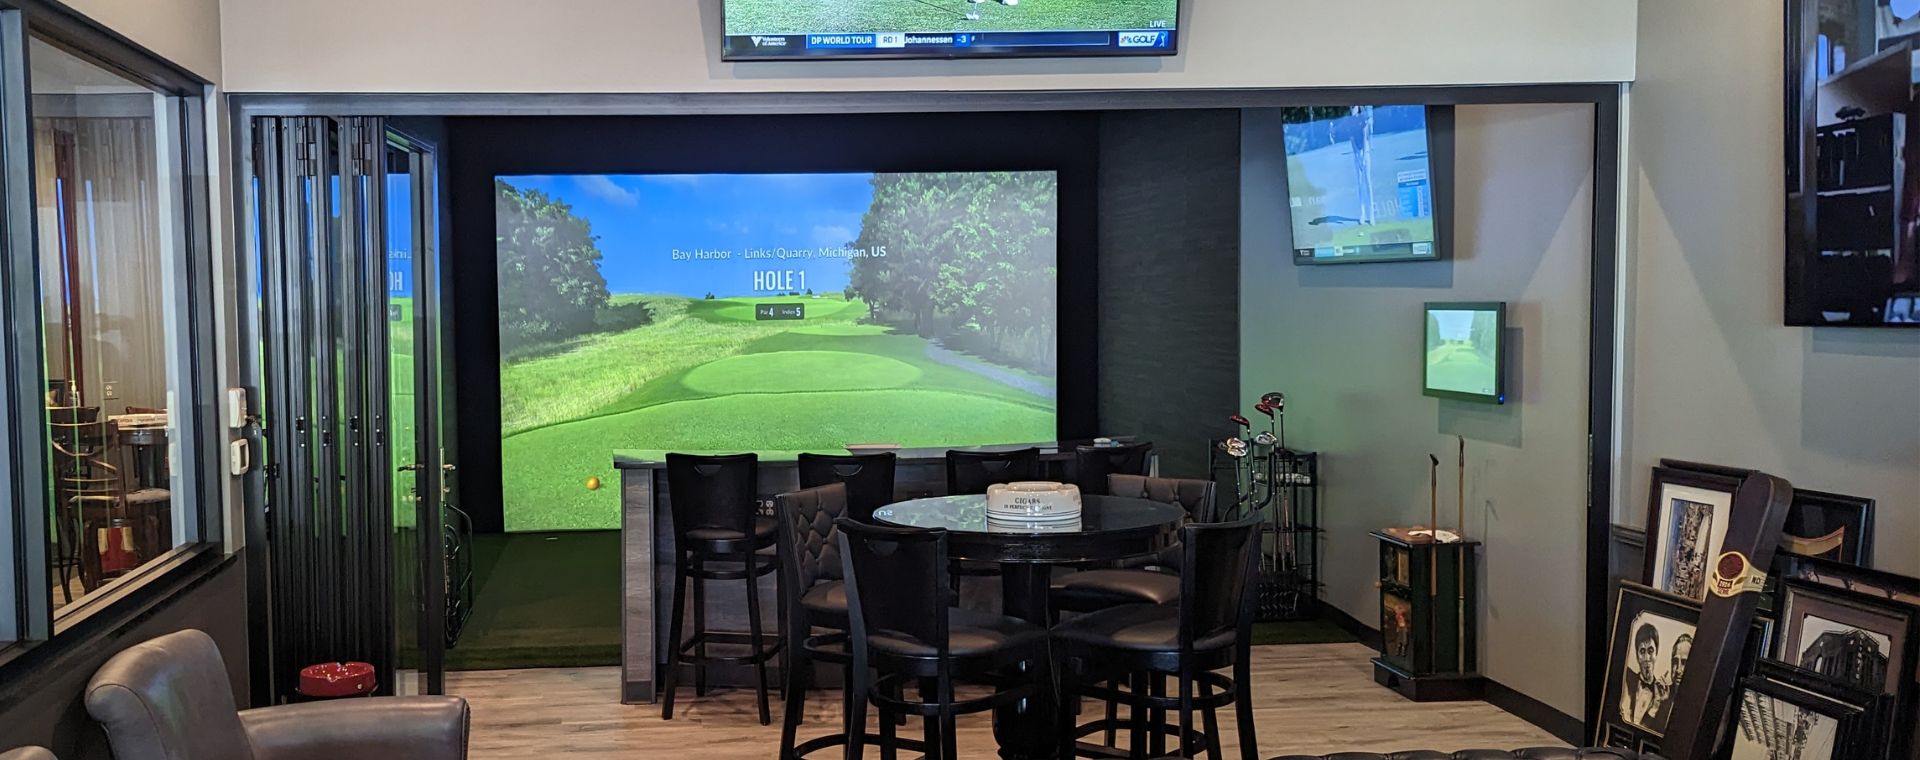 Courses Available at Smokys Cigar Lounge and Golf Simulator